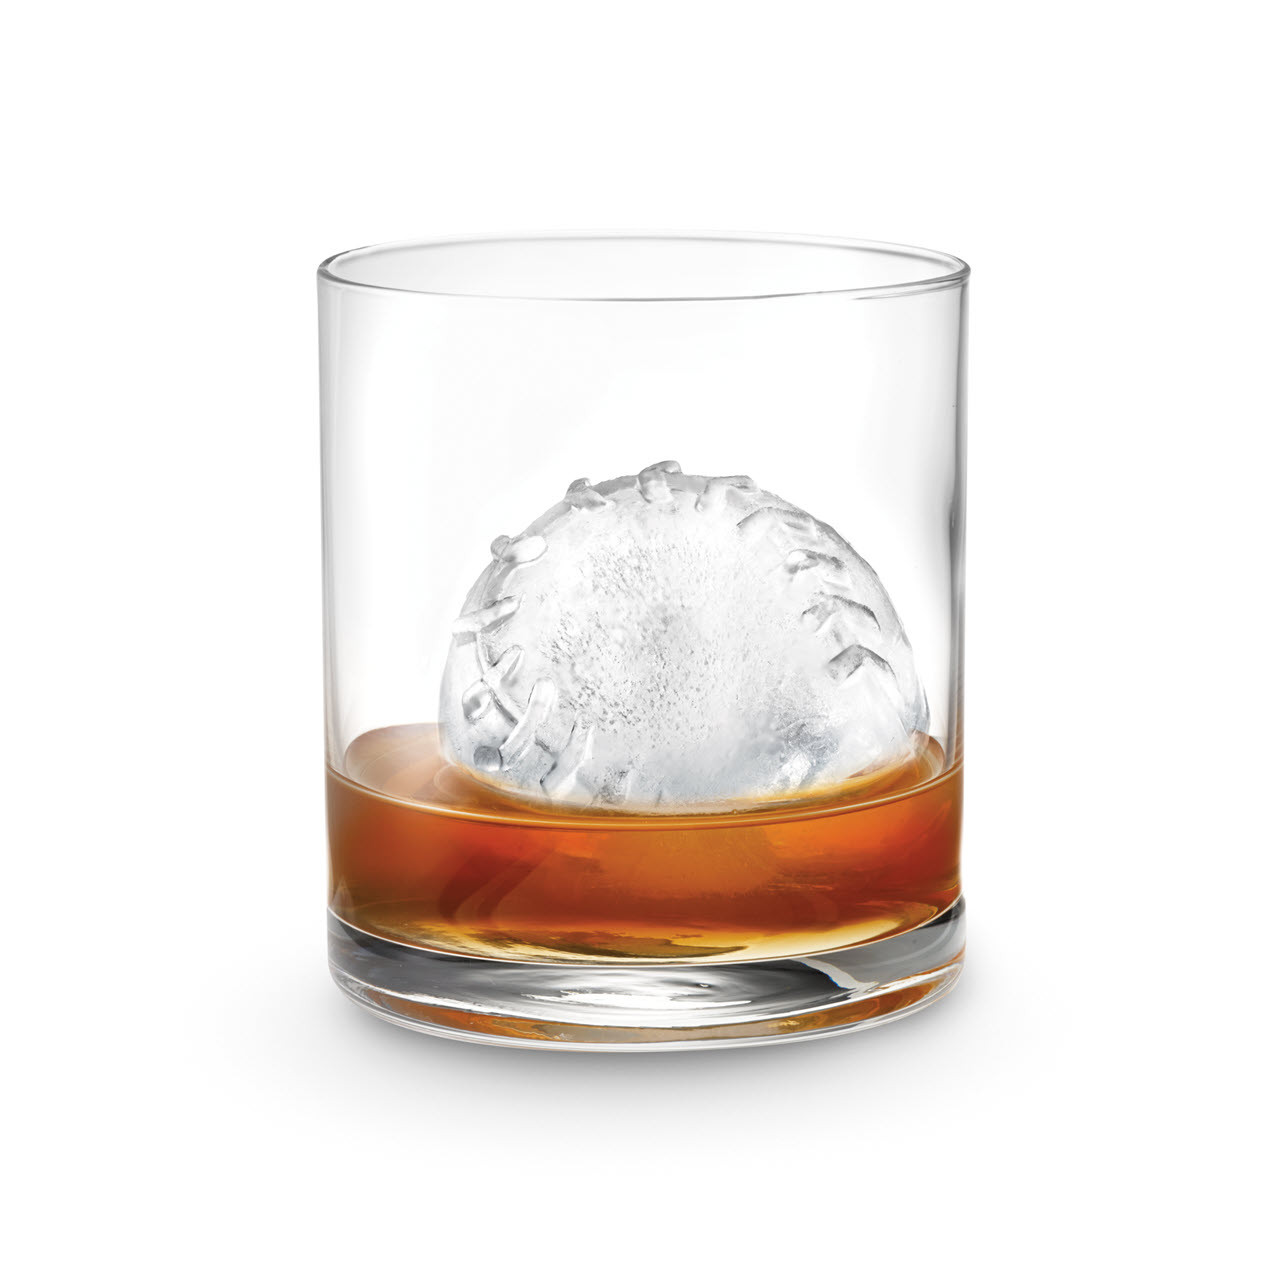  Tovolo Baseball Ice Molds (Set of 2) - Slow-Melting, Leak-Free,  Reusable, & BPA-Free Craft Ice Molds for Game Day/Great for Whiskey,  Cocktails, Coffee, Soda, Fun Drinks, and Gifts: Home & Kitchen